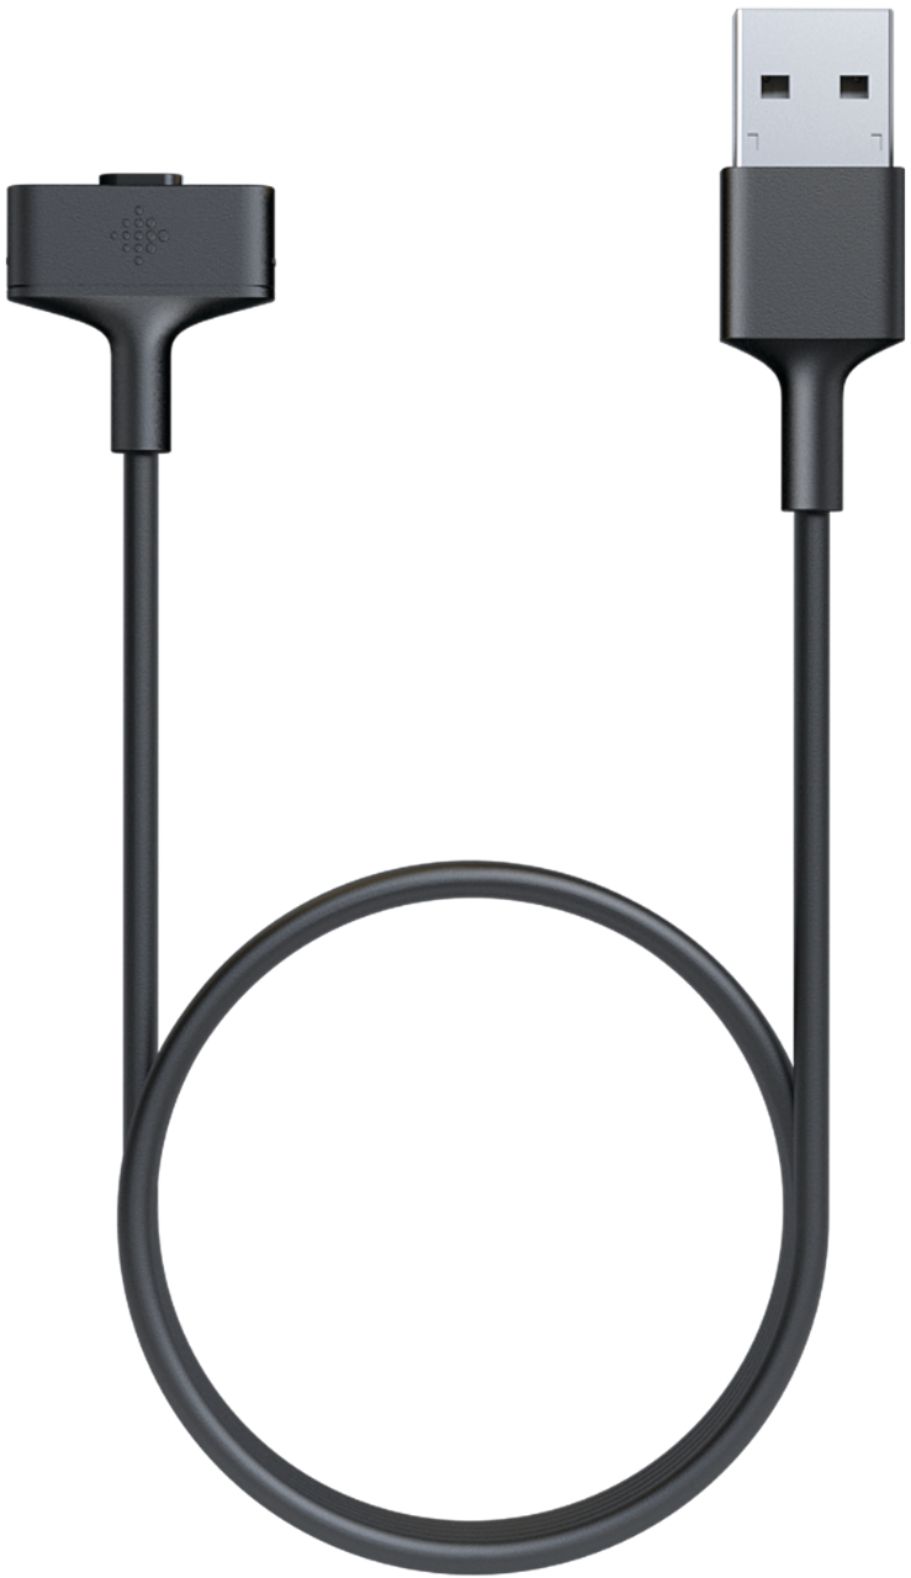 fitbit charging cord